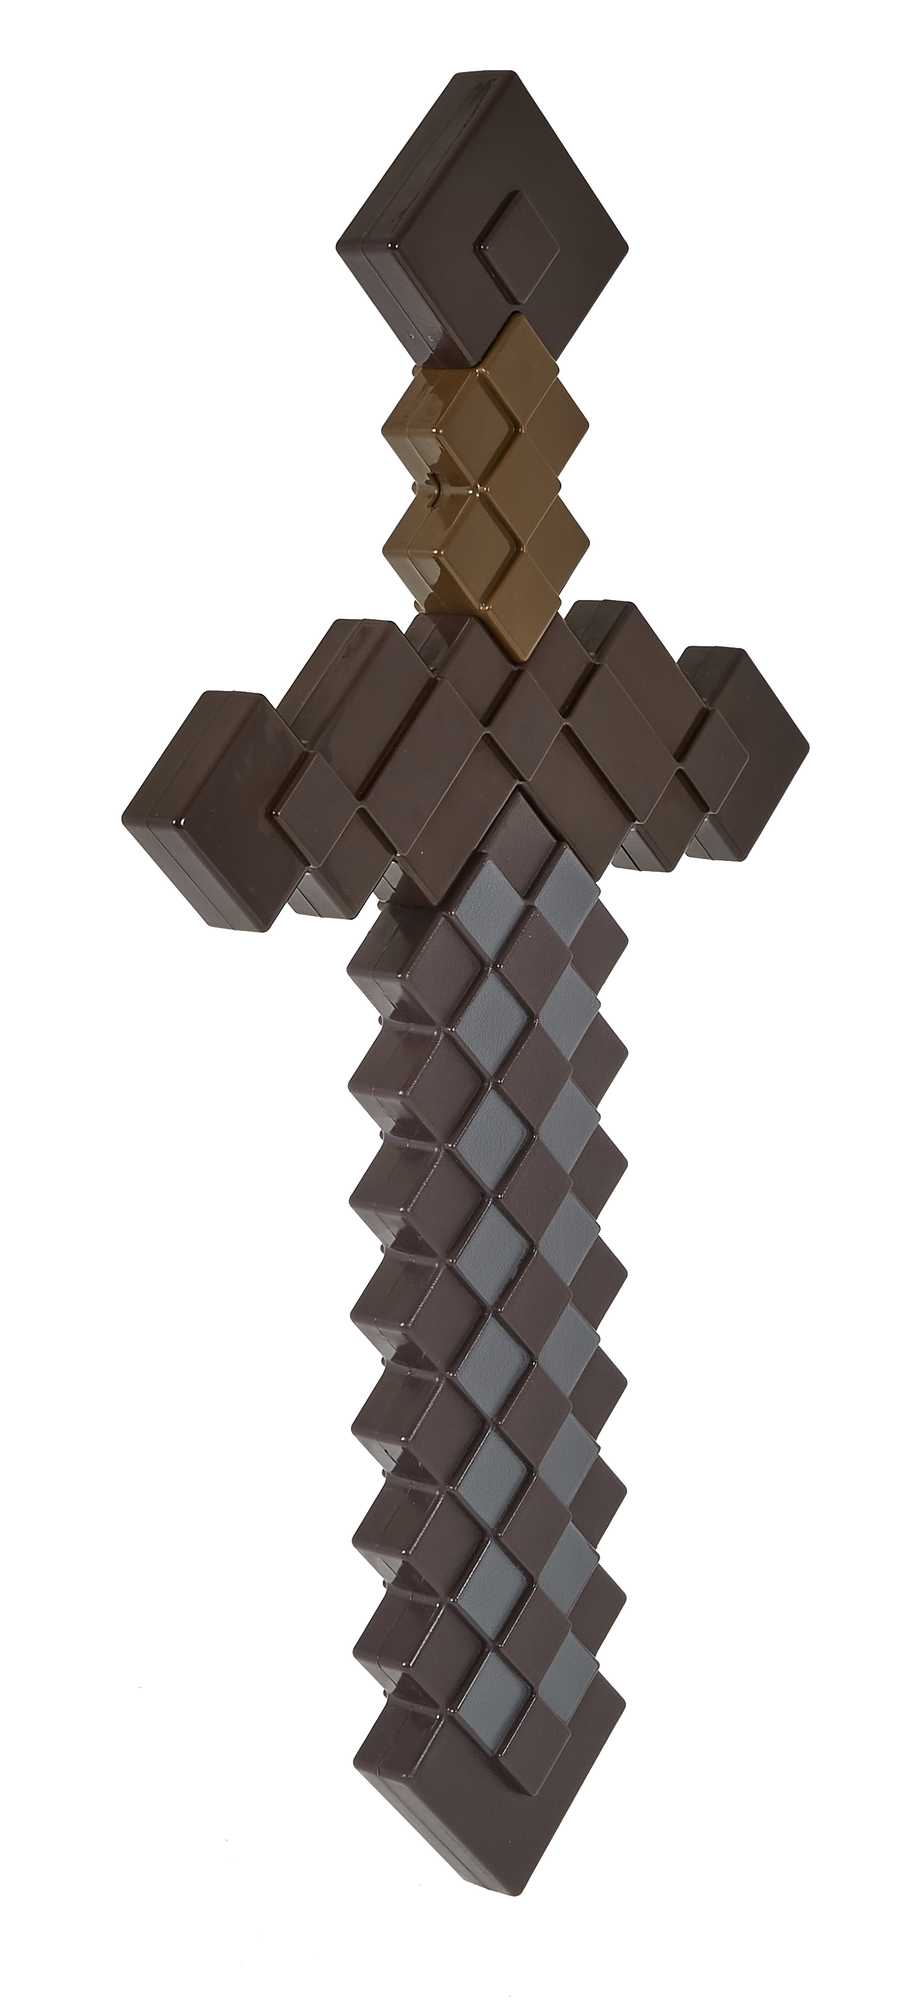 Minecraft Netherite Sword, Life-Size Role-Play Toy & Costume Accessory  Inspired by the Video Game